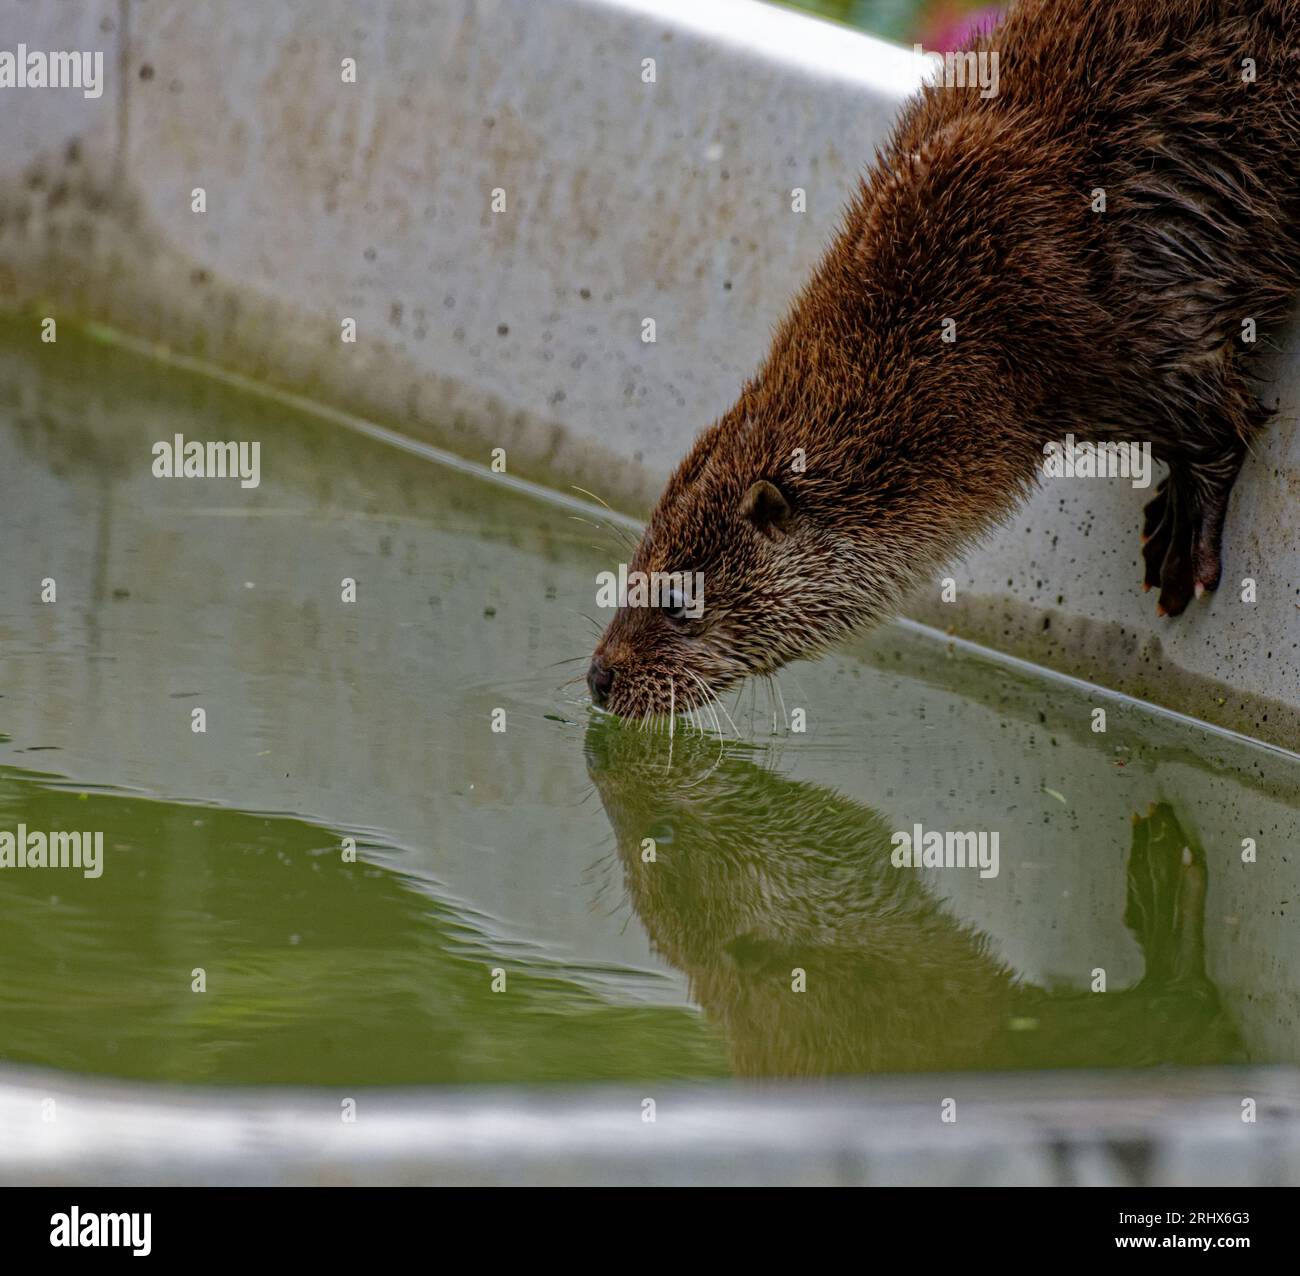 Eurasian Otter (Lutra lutra) Juvenile about to enter water with reflection. Stock Photo